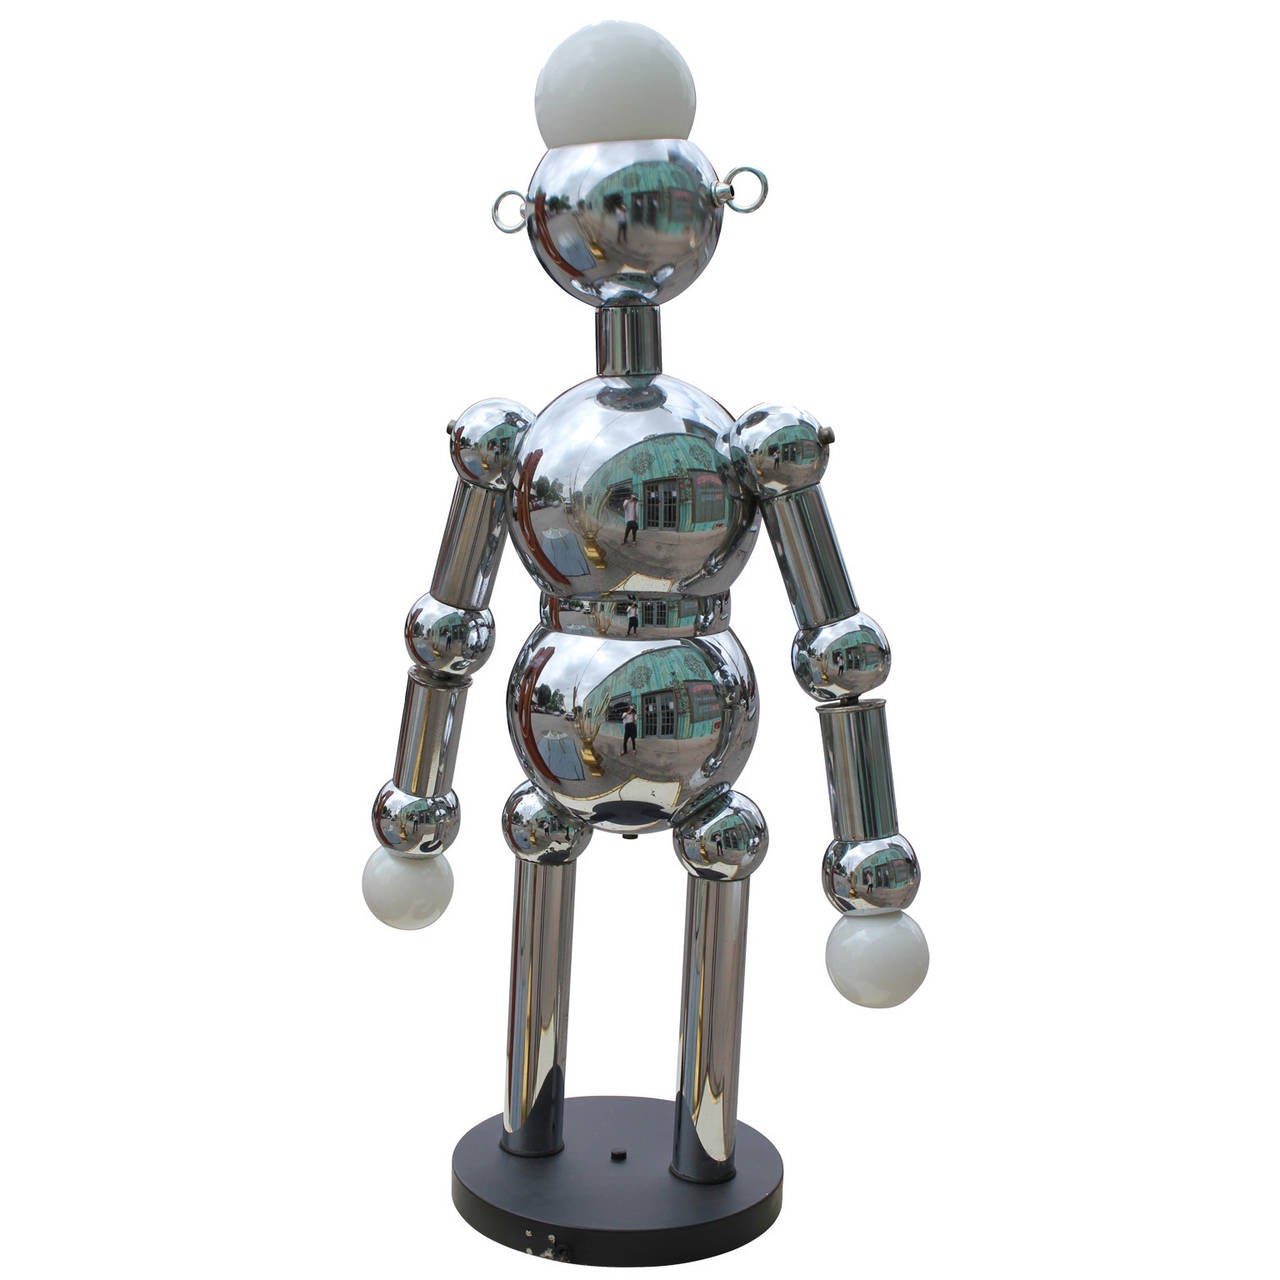 Torino Chrome Robot in the largest size. Robot is in nice vintage condition with light wear to the metal.